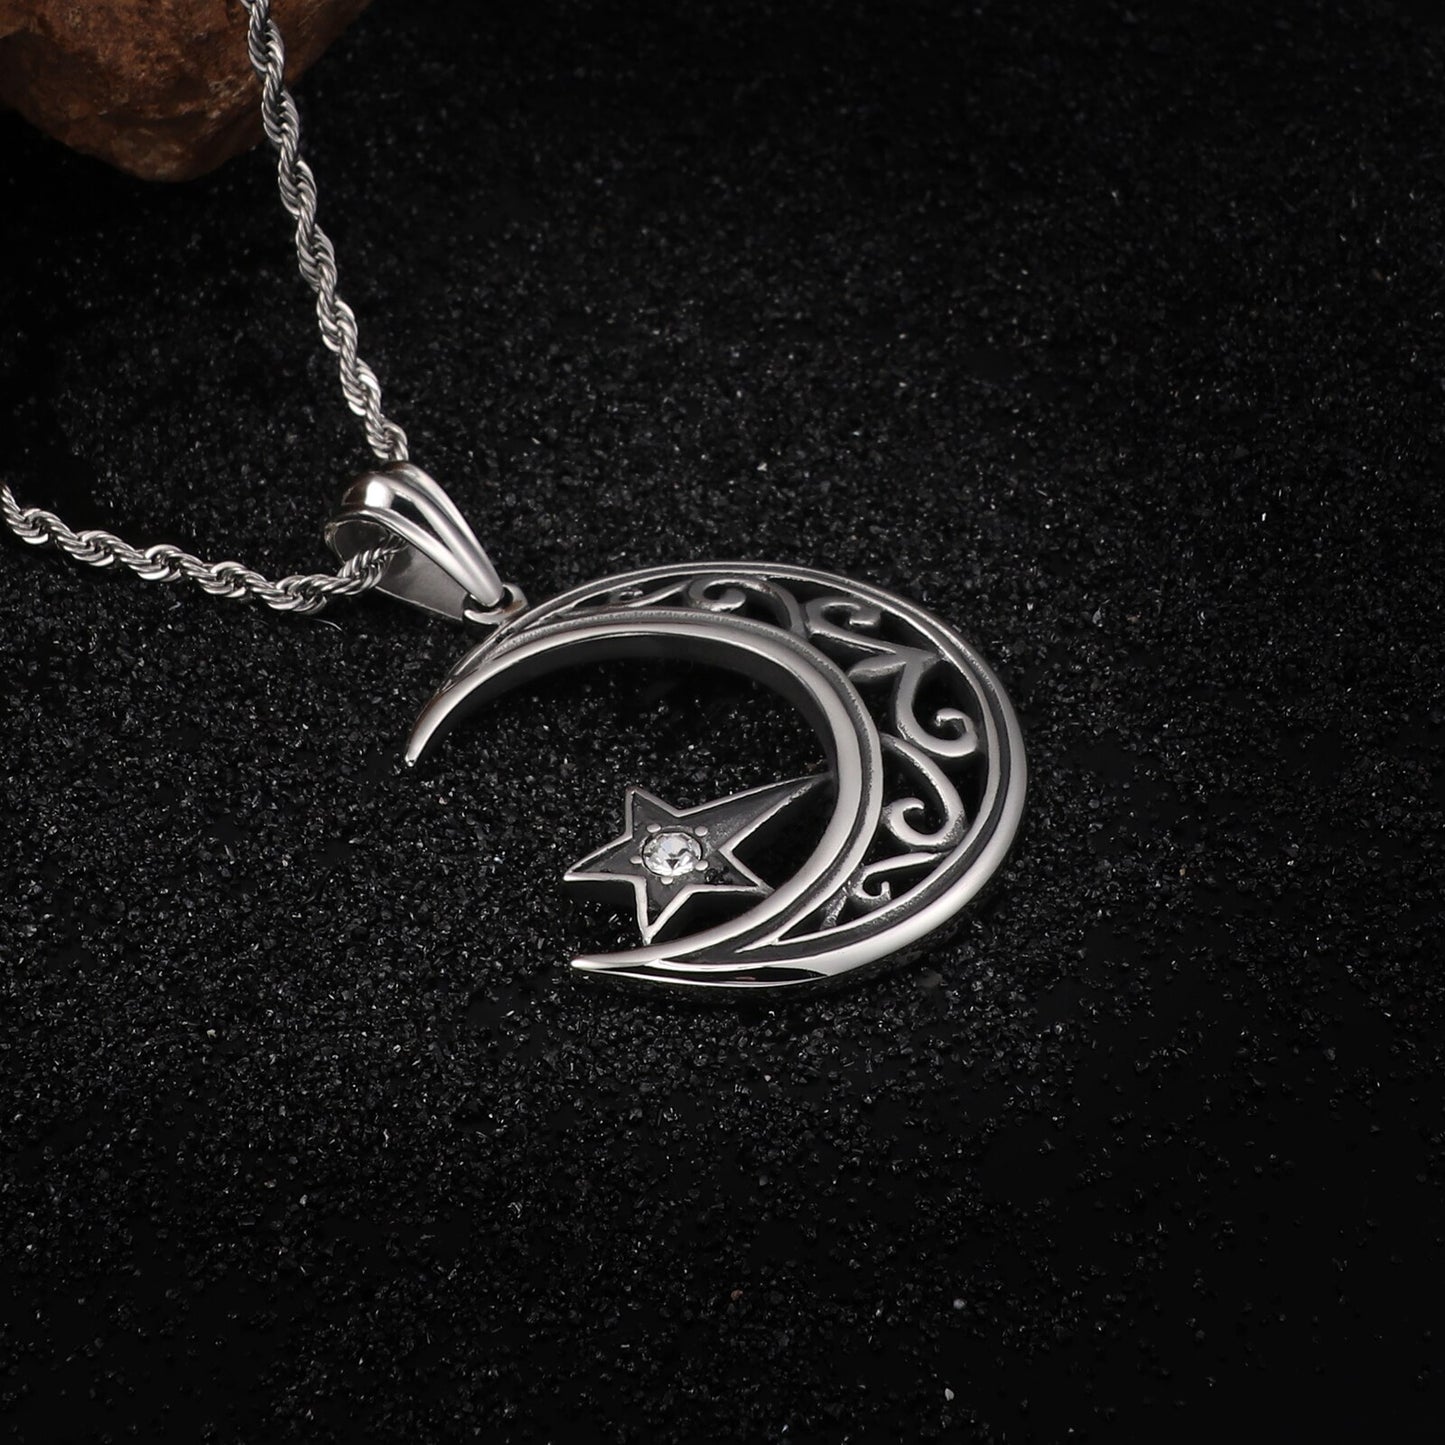 Moon and Star Scrollwork Pendant Necklace